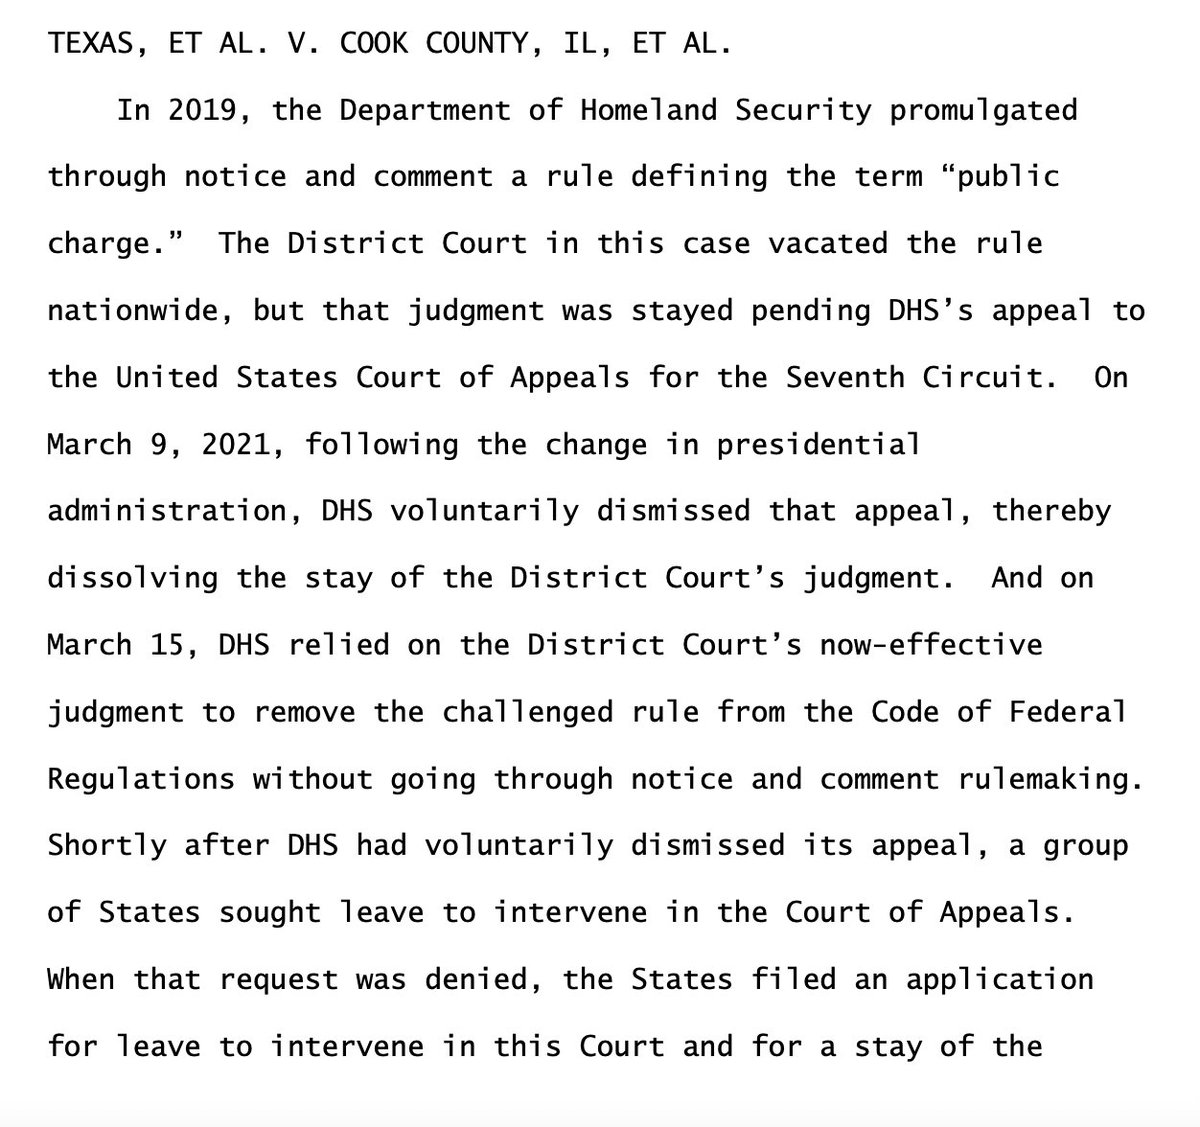 The Supreme Court sends a signal that it may let states intervene to defend Trump's "public charge" rule—which seeks to limit immigrants' access to public benefits—potentially throwing a wrench in the Biden administration's attempt to kill it through a court settlement.